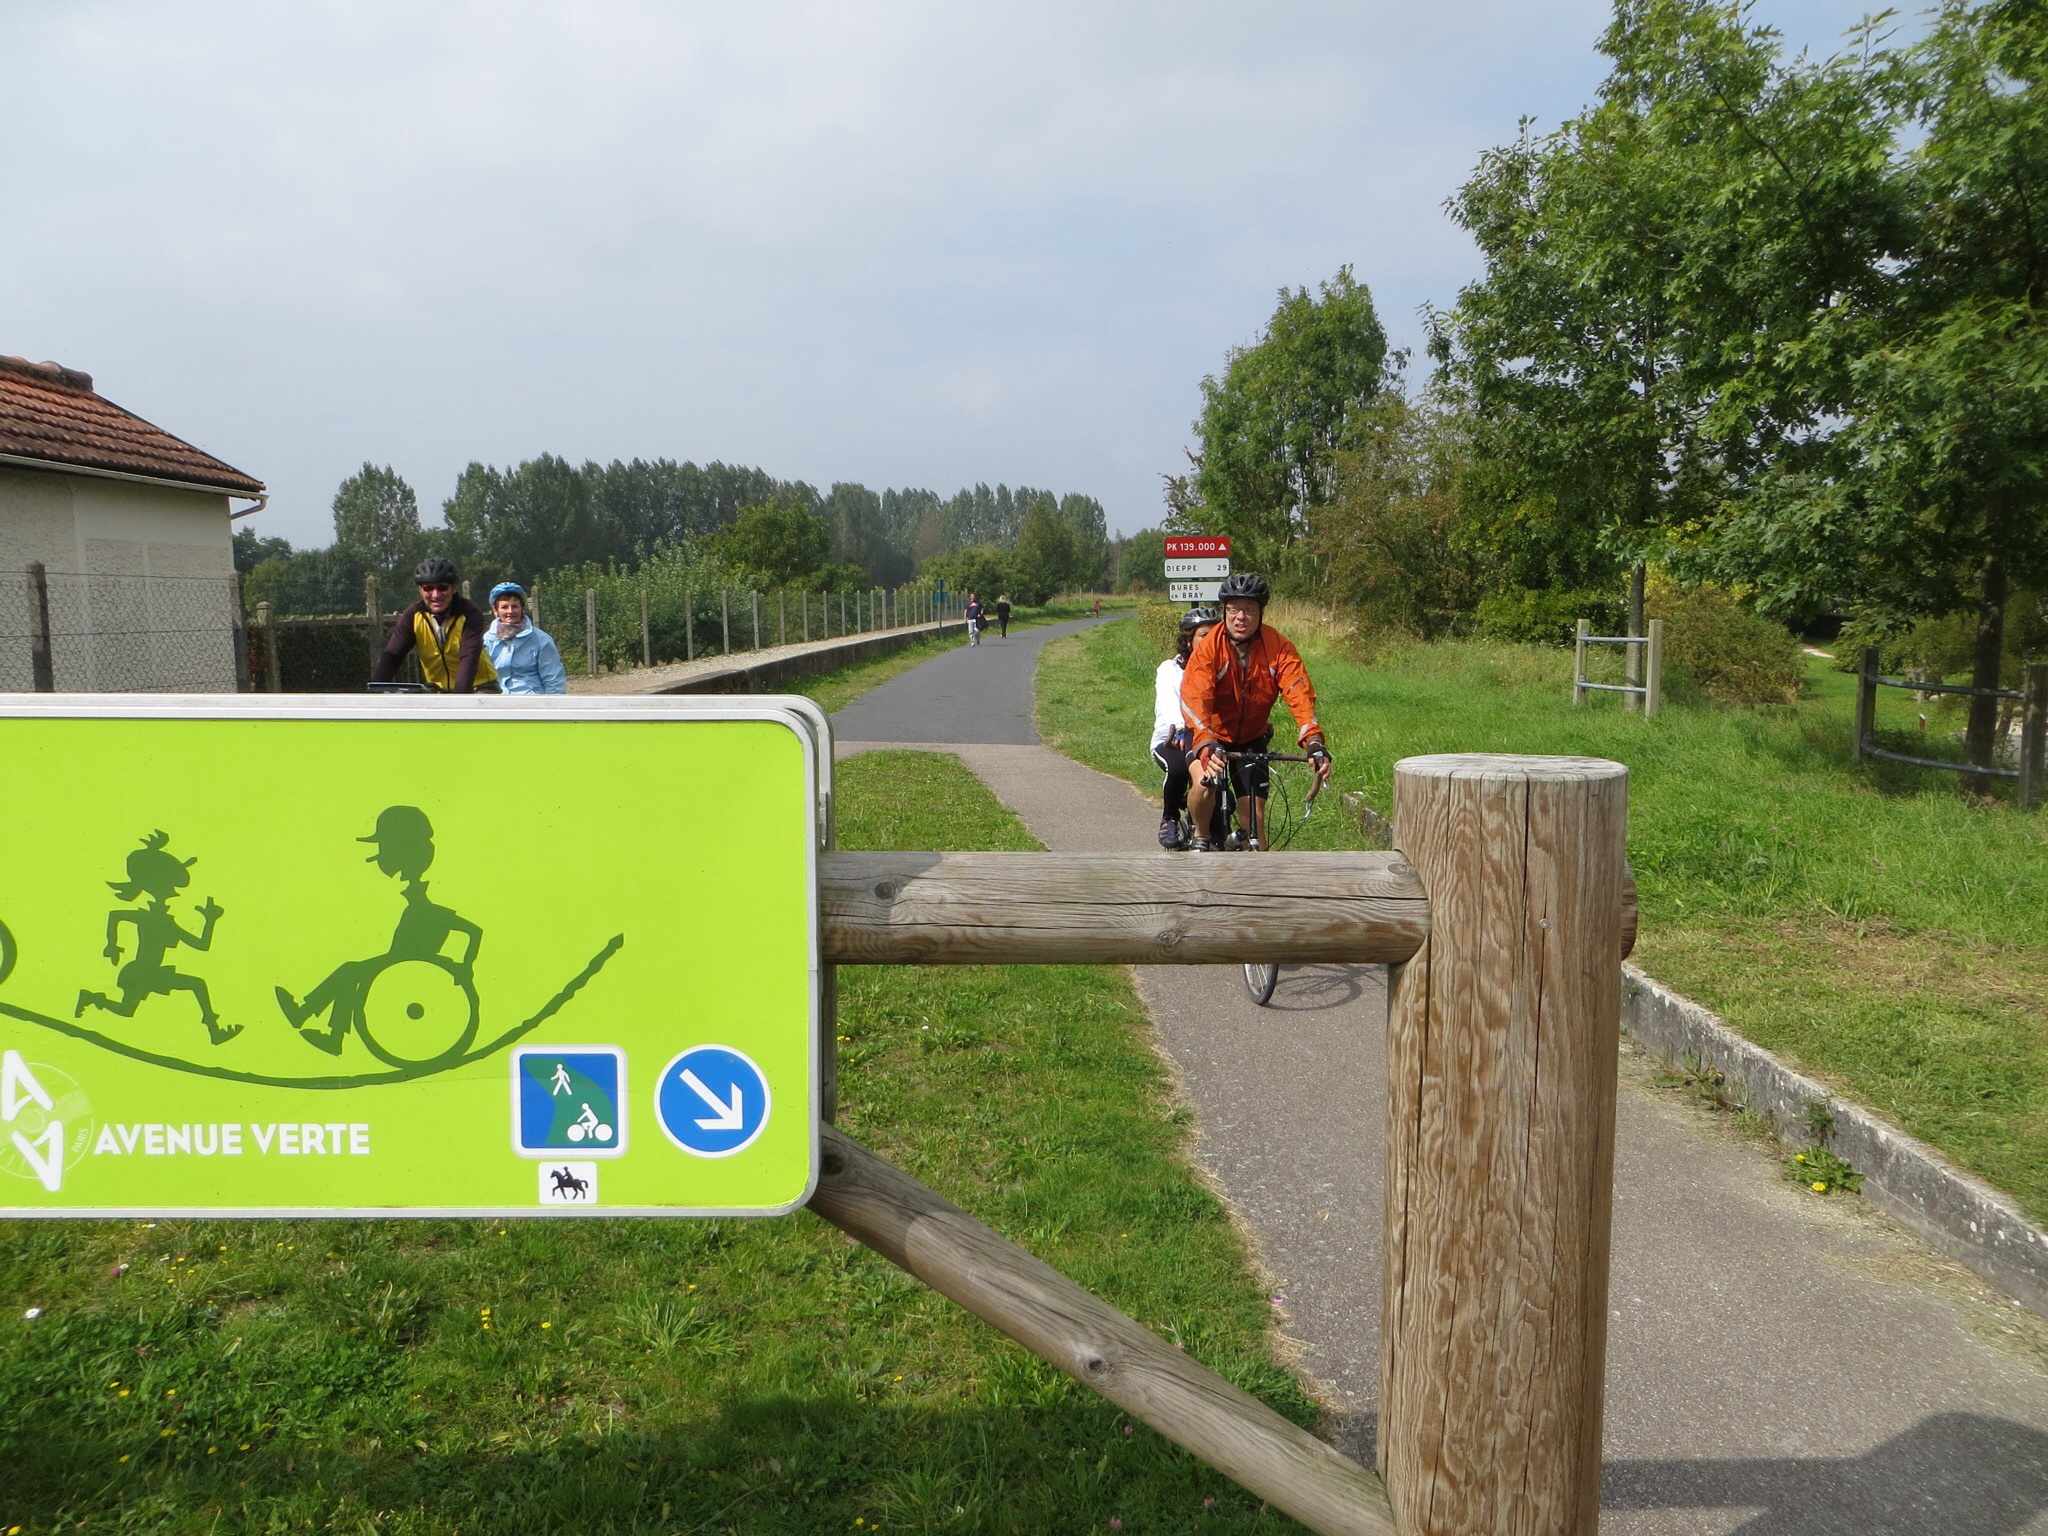 French rail-trail extended 30 miles from Forges les Eaux, part of bike route from Paris to London